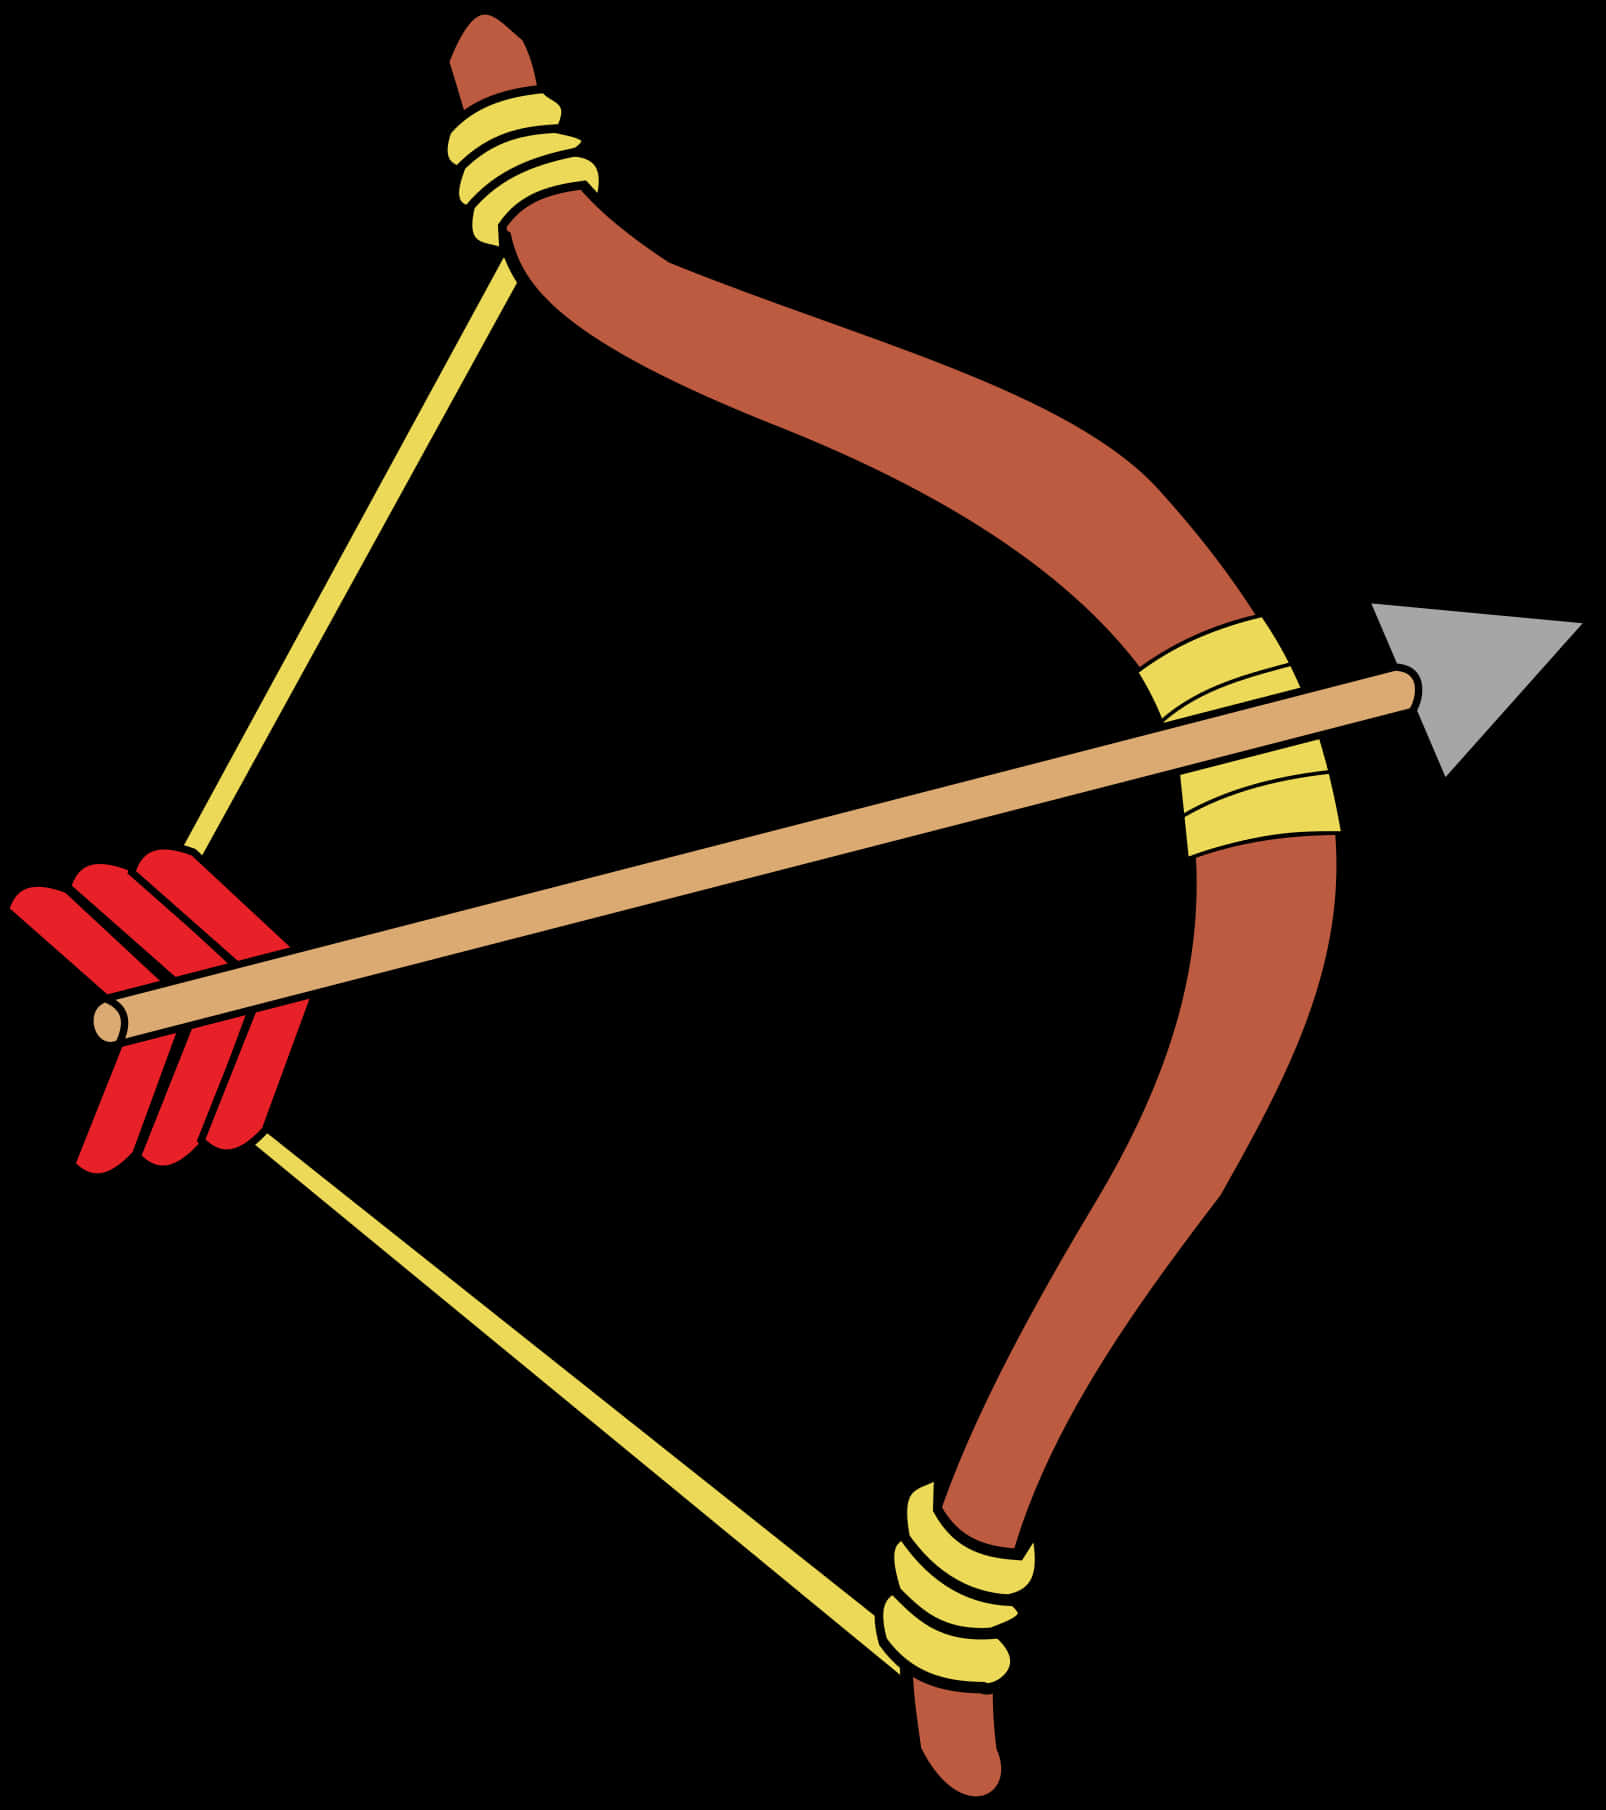 Classic Bowand Arrow Illustration PNG image